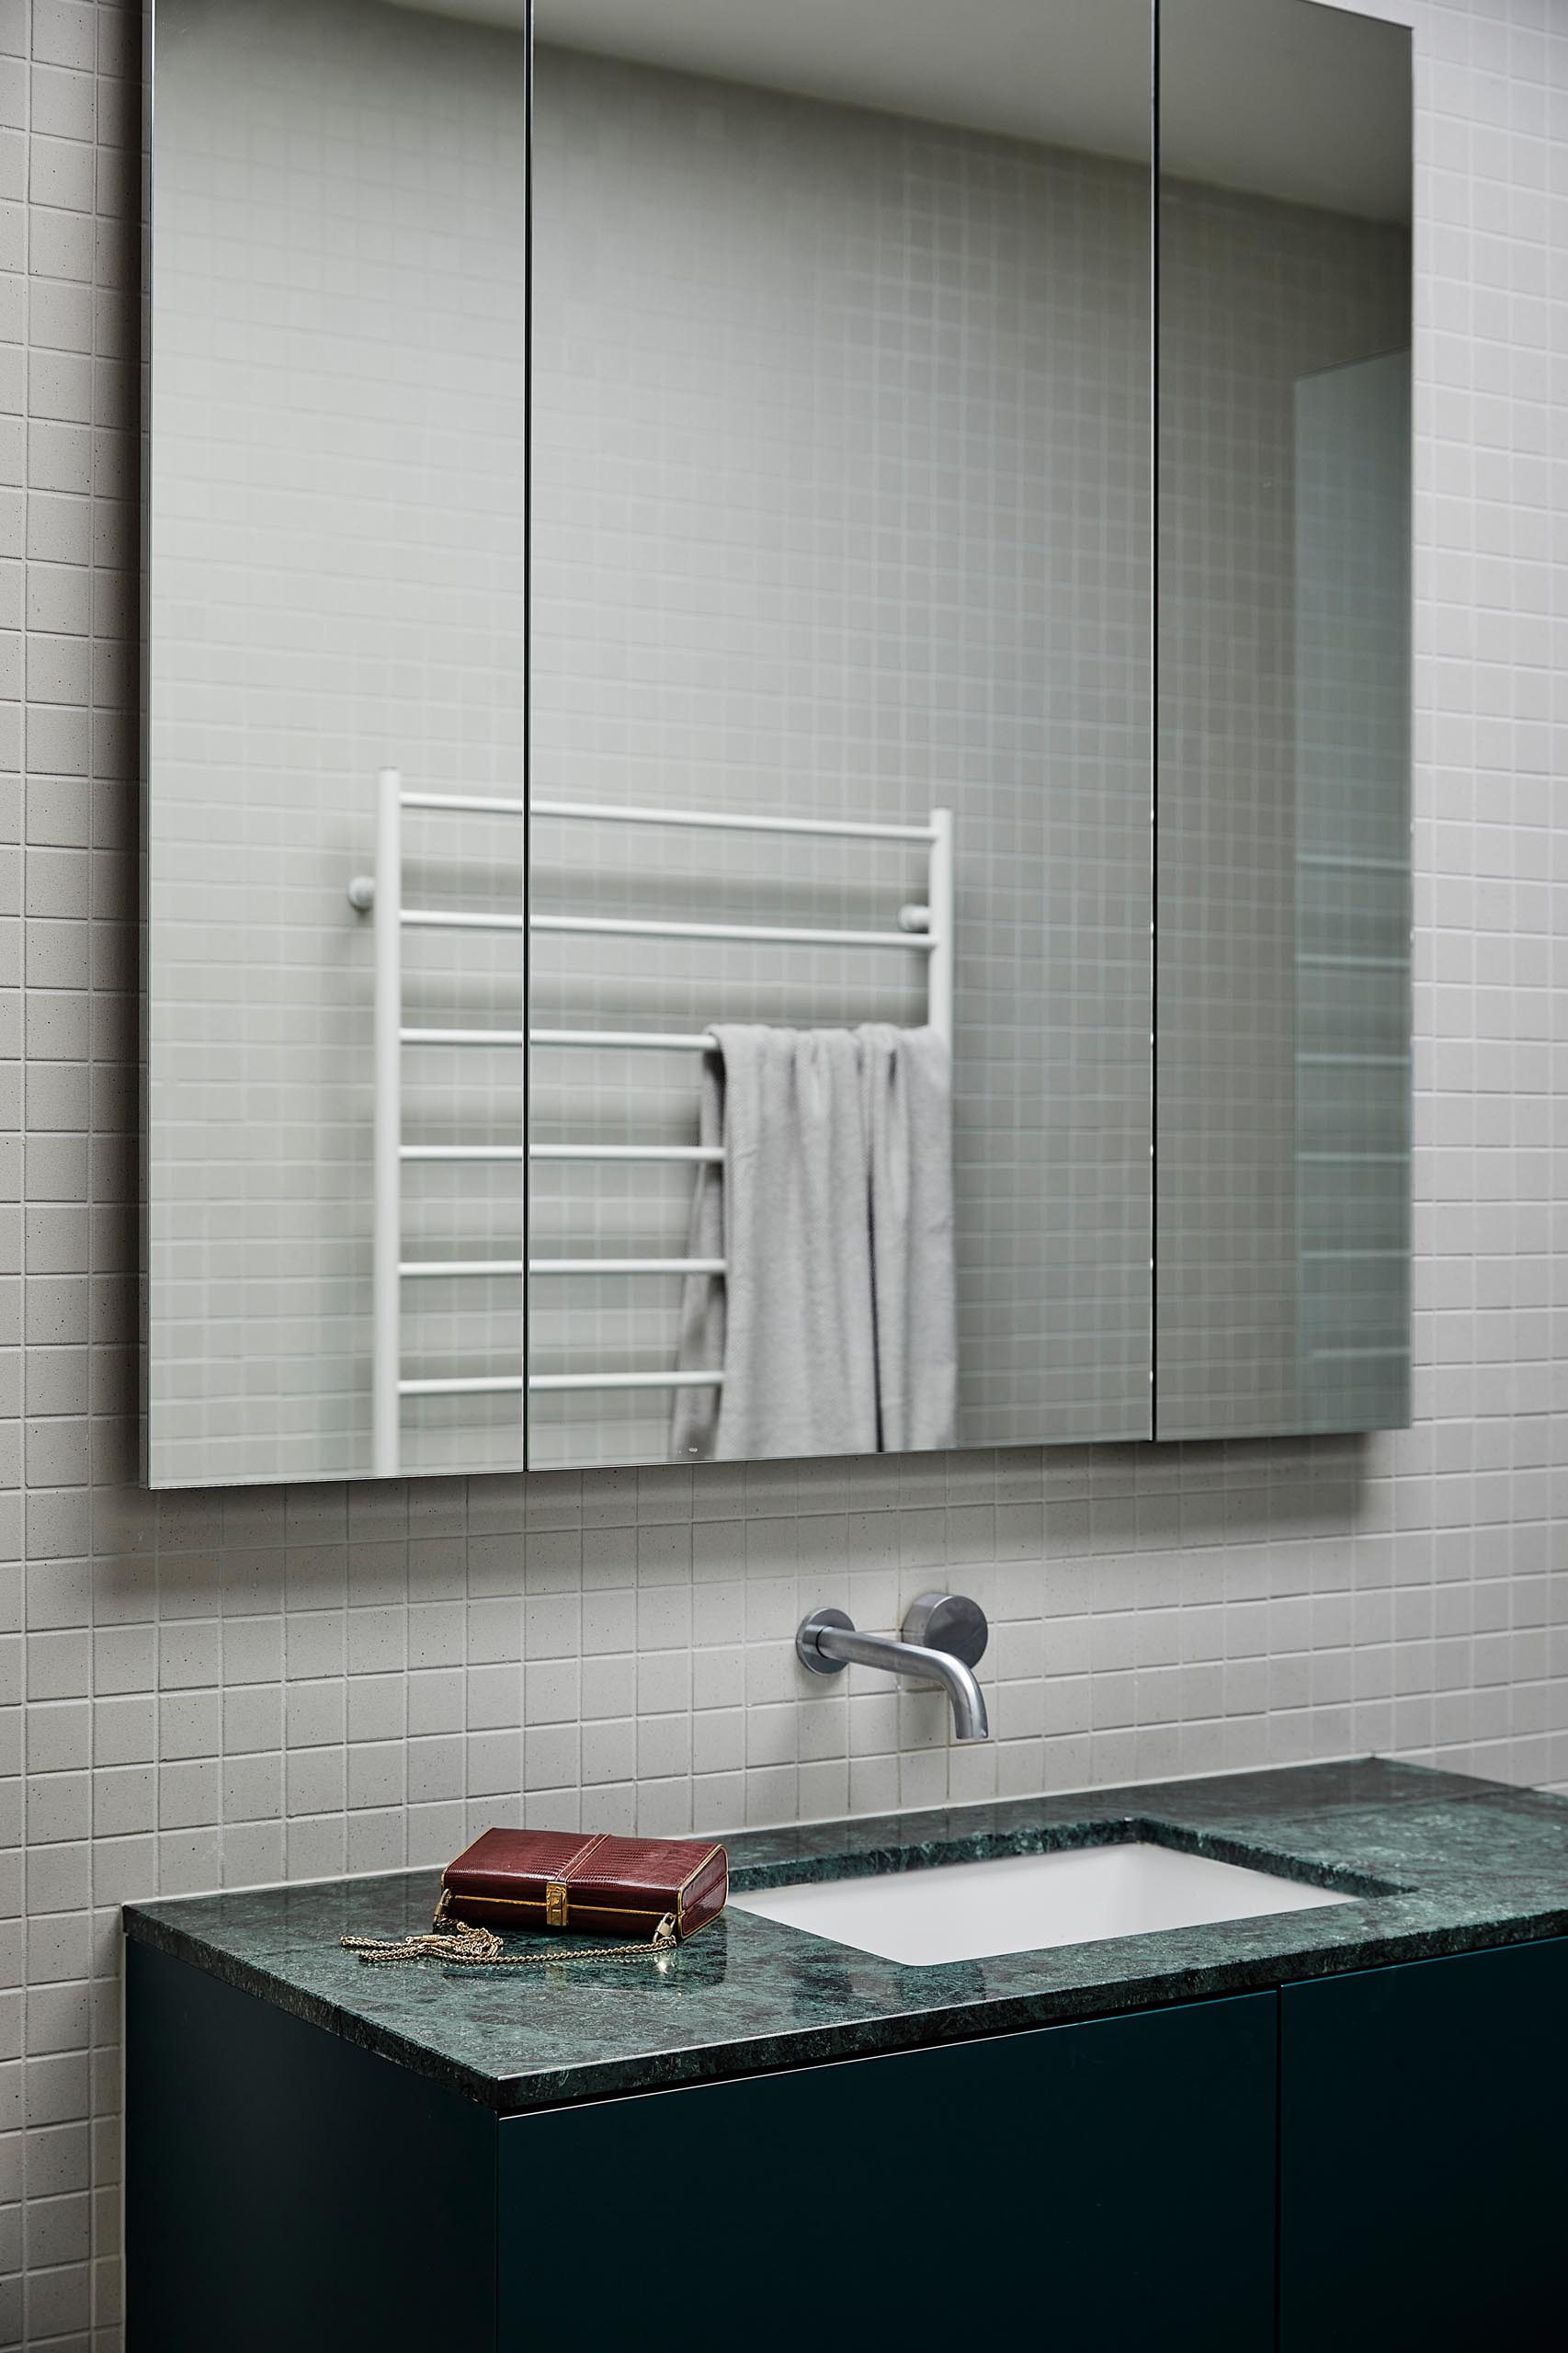 A modern bathroom with a a dark green vanity that contrasts the light gray square wall tiles and white basin.